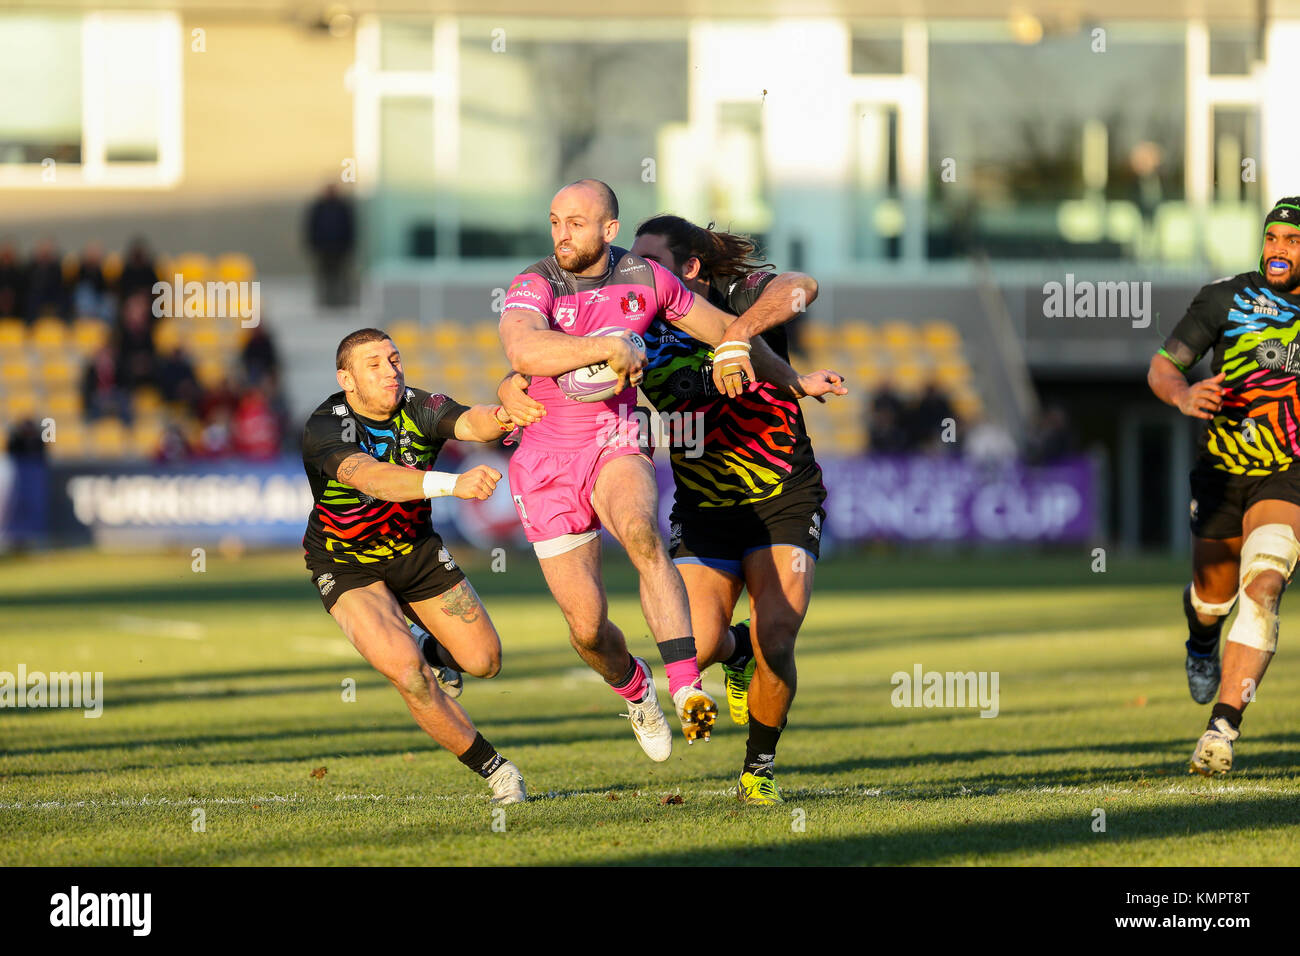 Parma, Italy. 9h December 2017. Gloucester's wing Charlie Sharples carries the ball in the match against Zebre in EPCR Challenge Cup 2017/18. Massimiliano Carnabuci/Alamy Live News Stock Photo